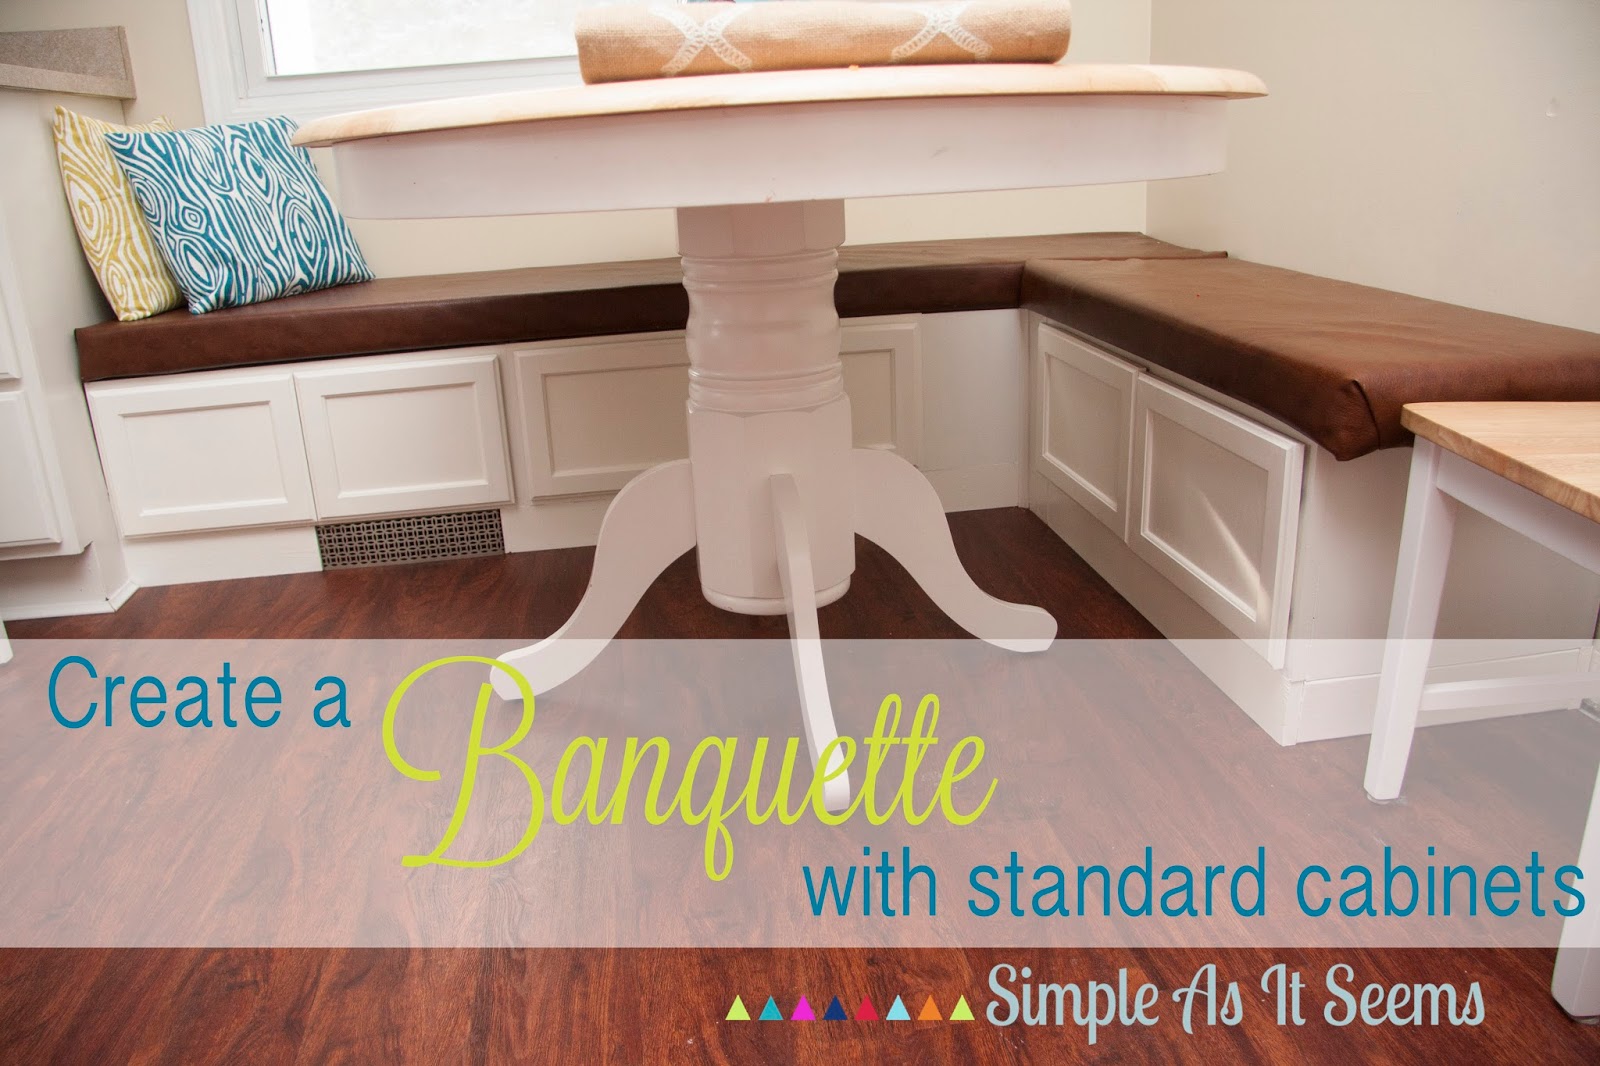 Simple As It Seems: DIY Kitchen Banquette Seating from ...